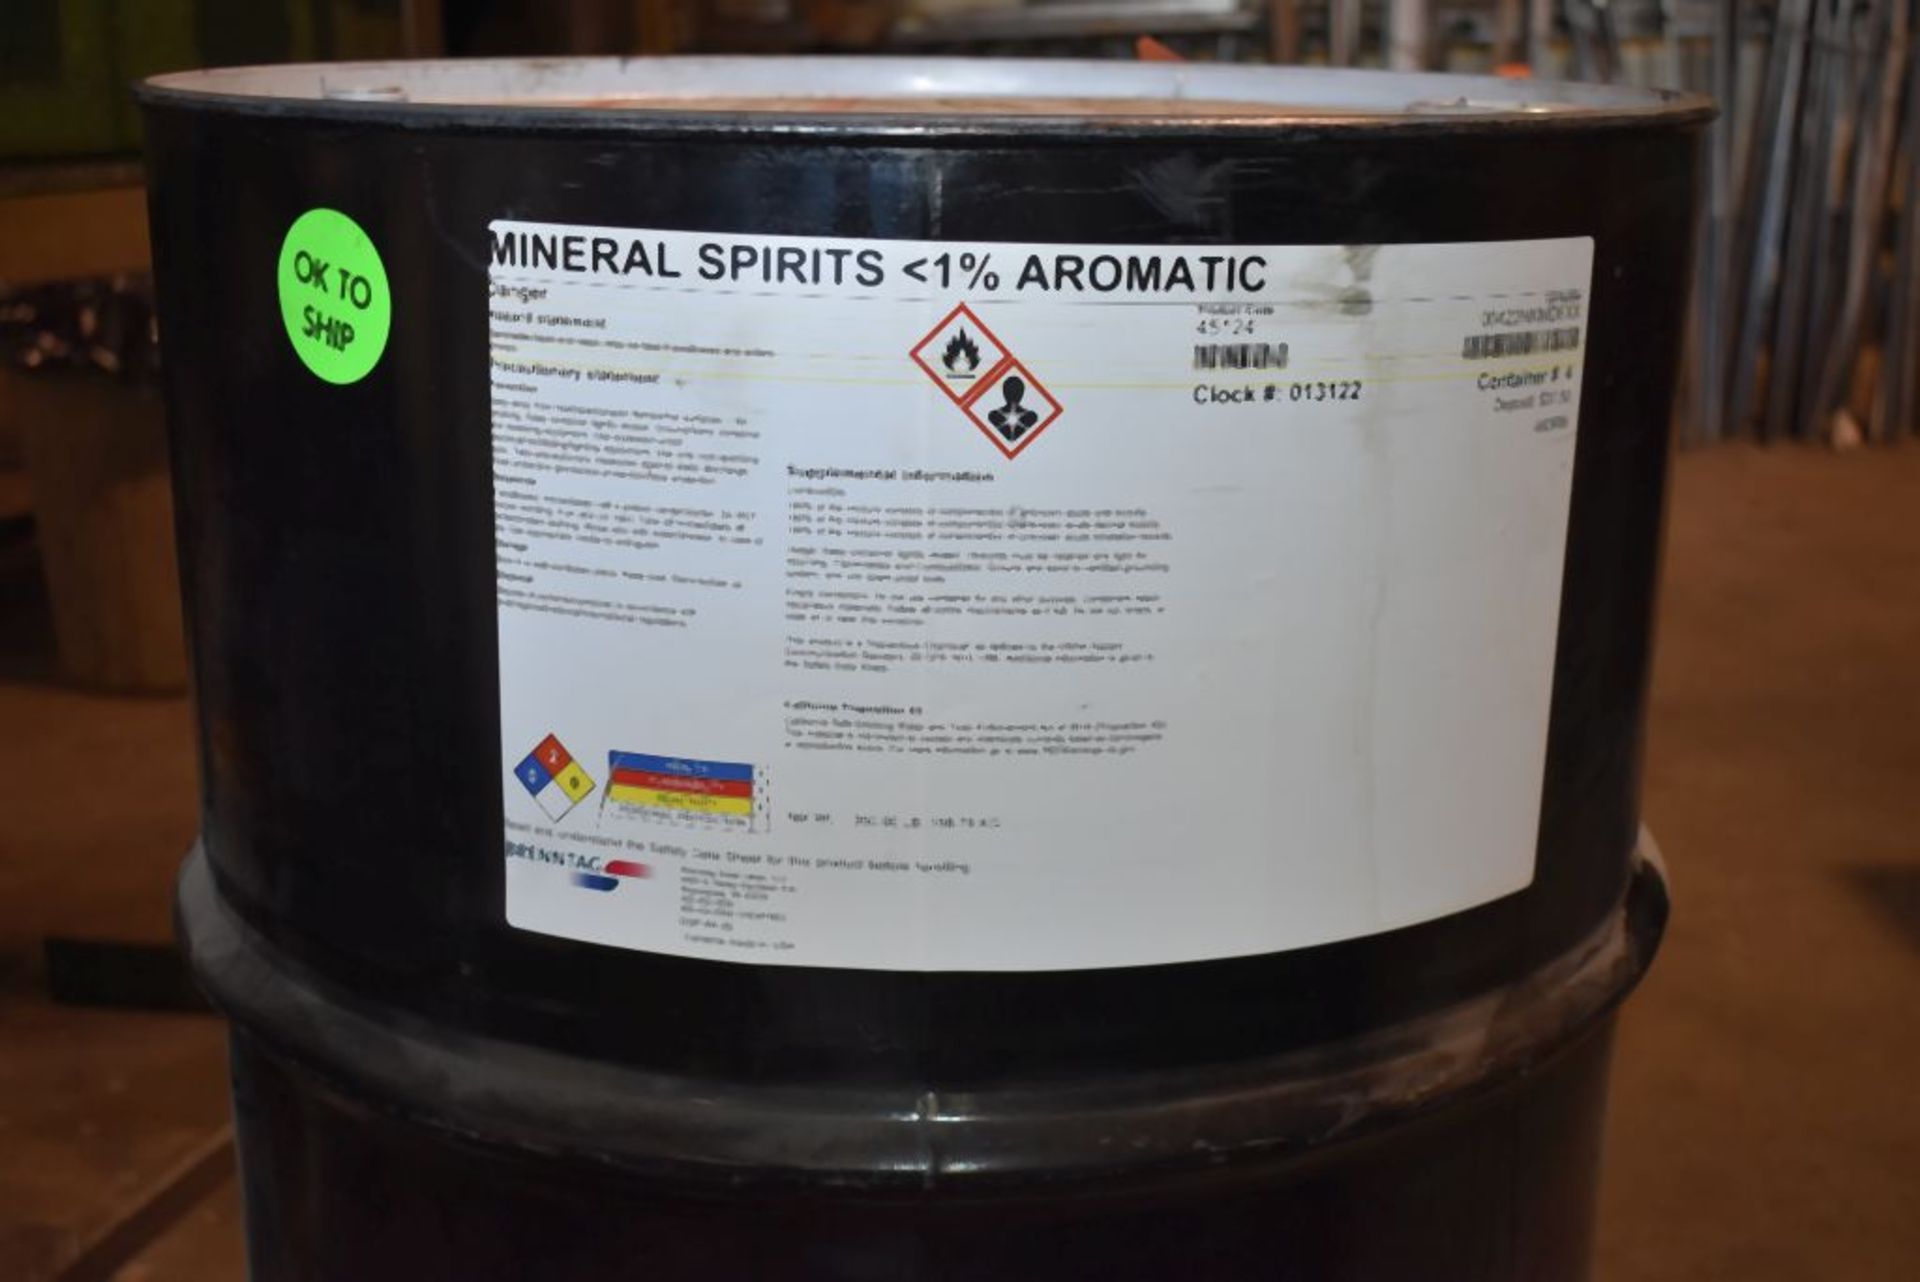 55 GALLON DRUM OF MINERAL SPIRITS <1 PERCENT AROMATIC, APPROX. 1/2 FULL - Image 2 of 2